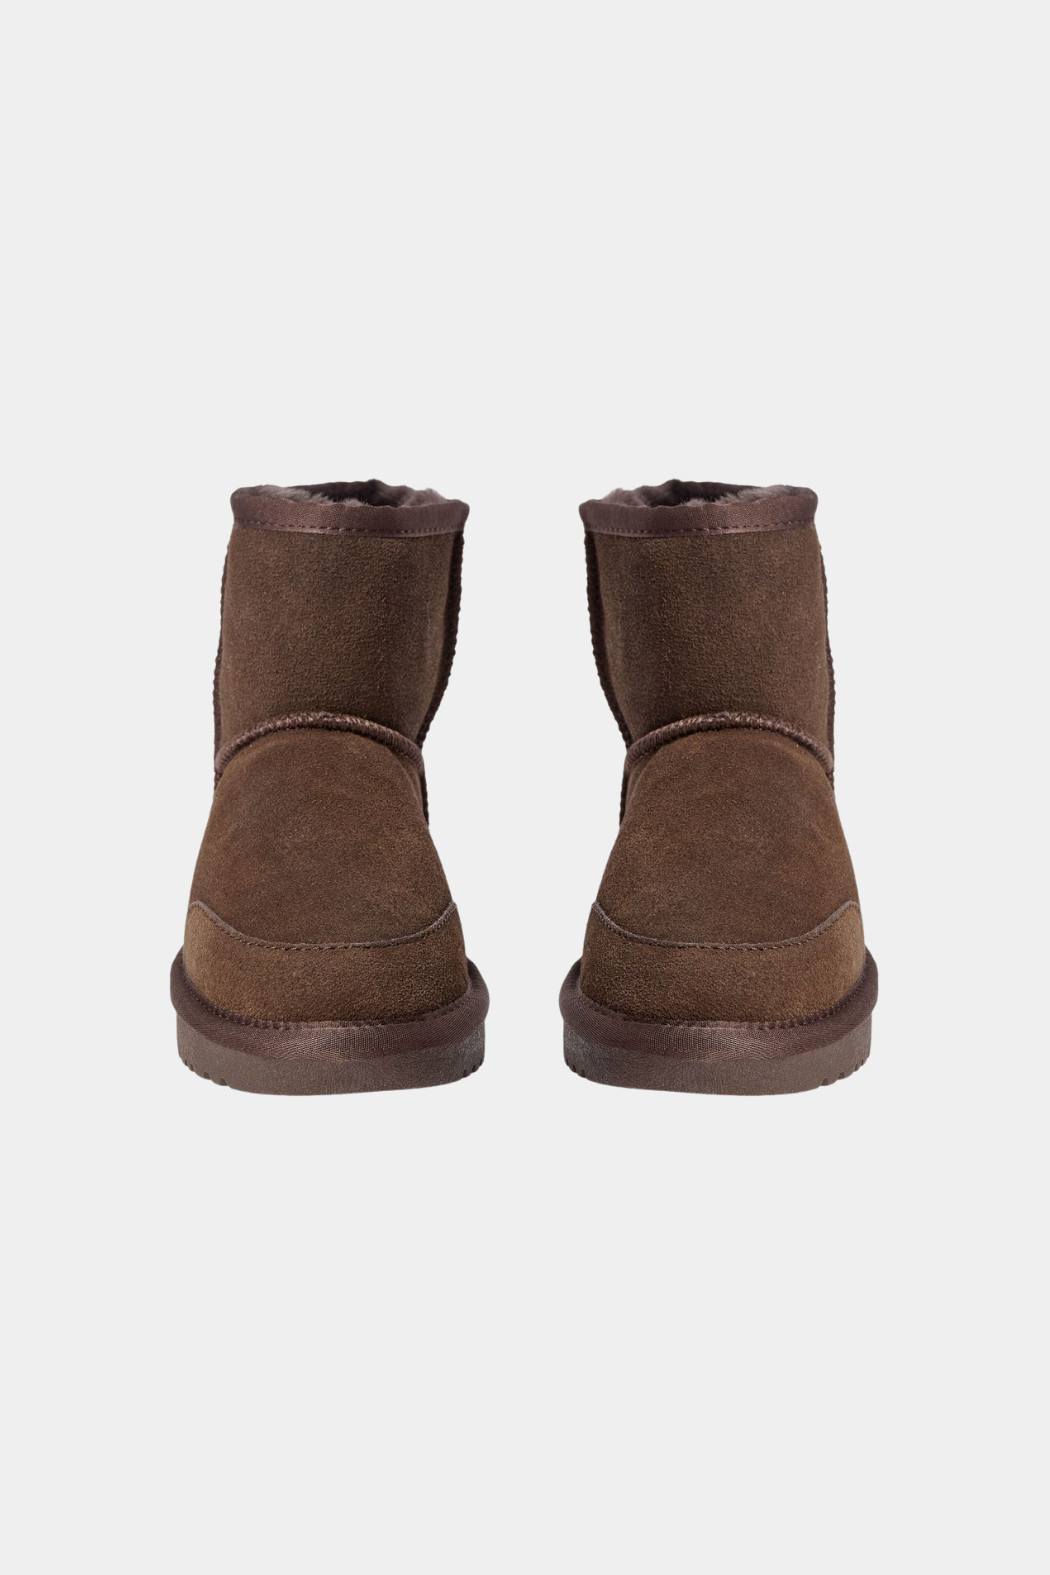 T418 boot, brown